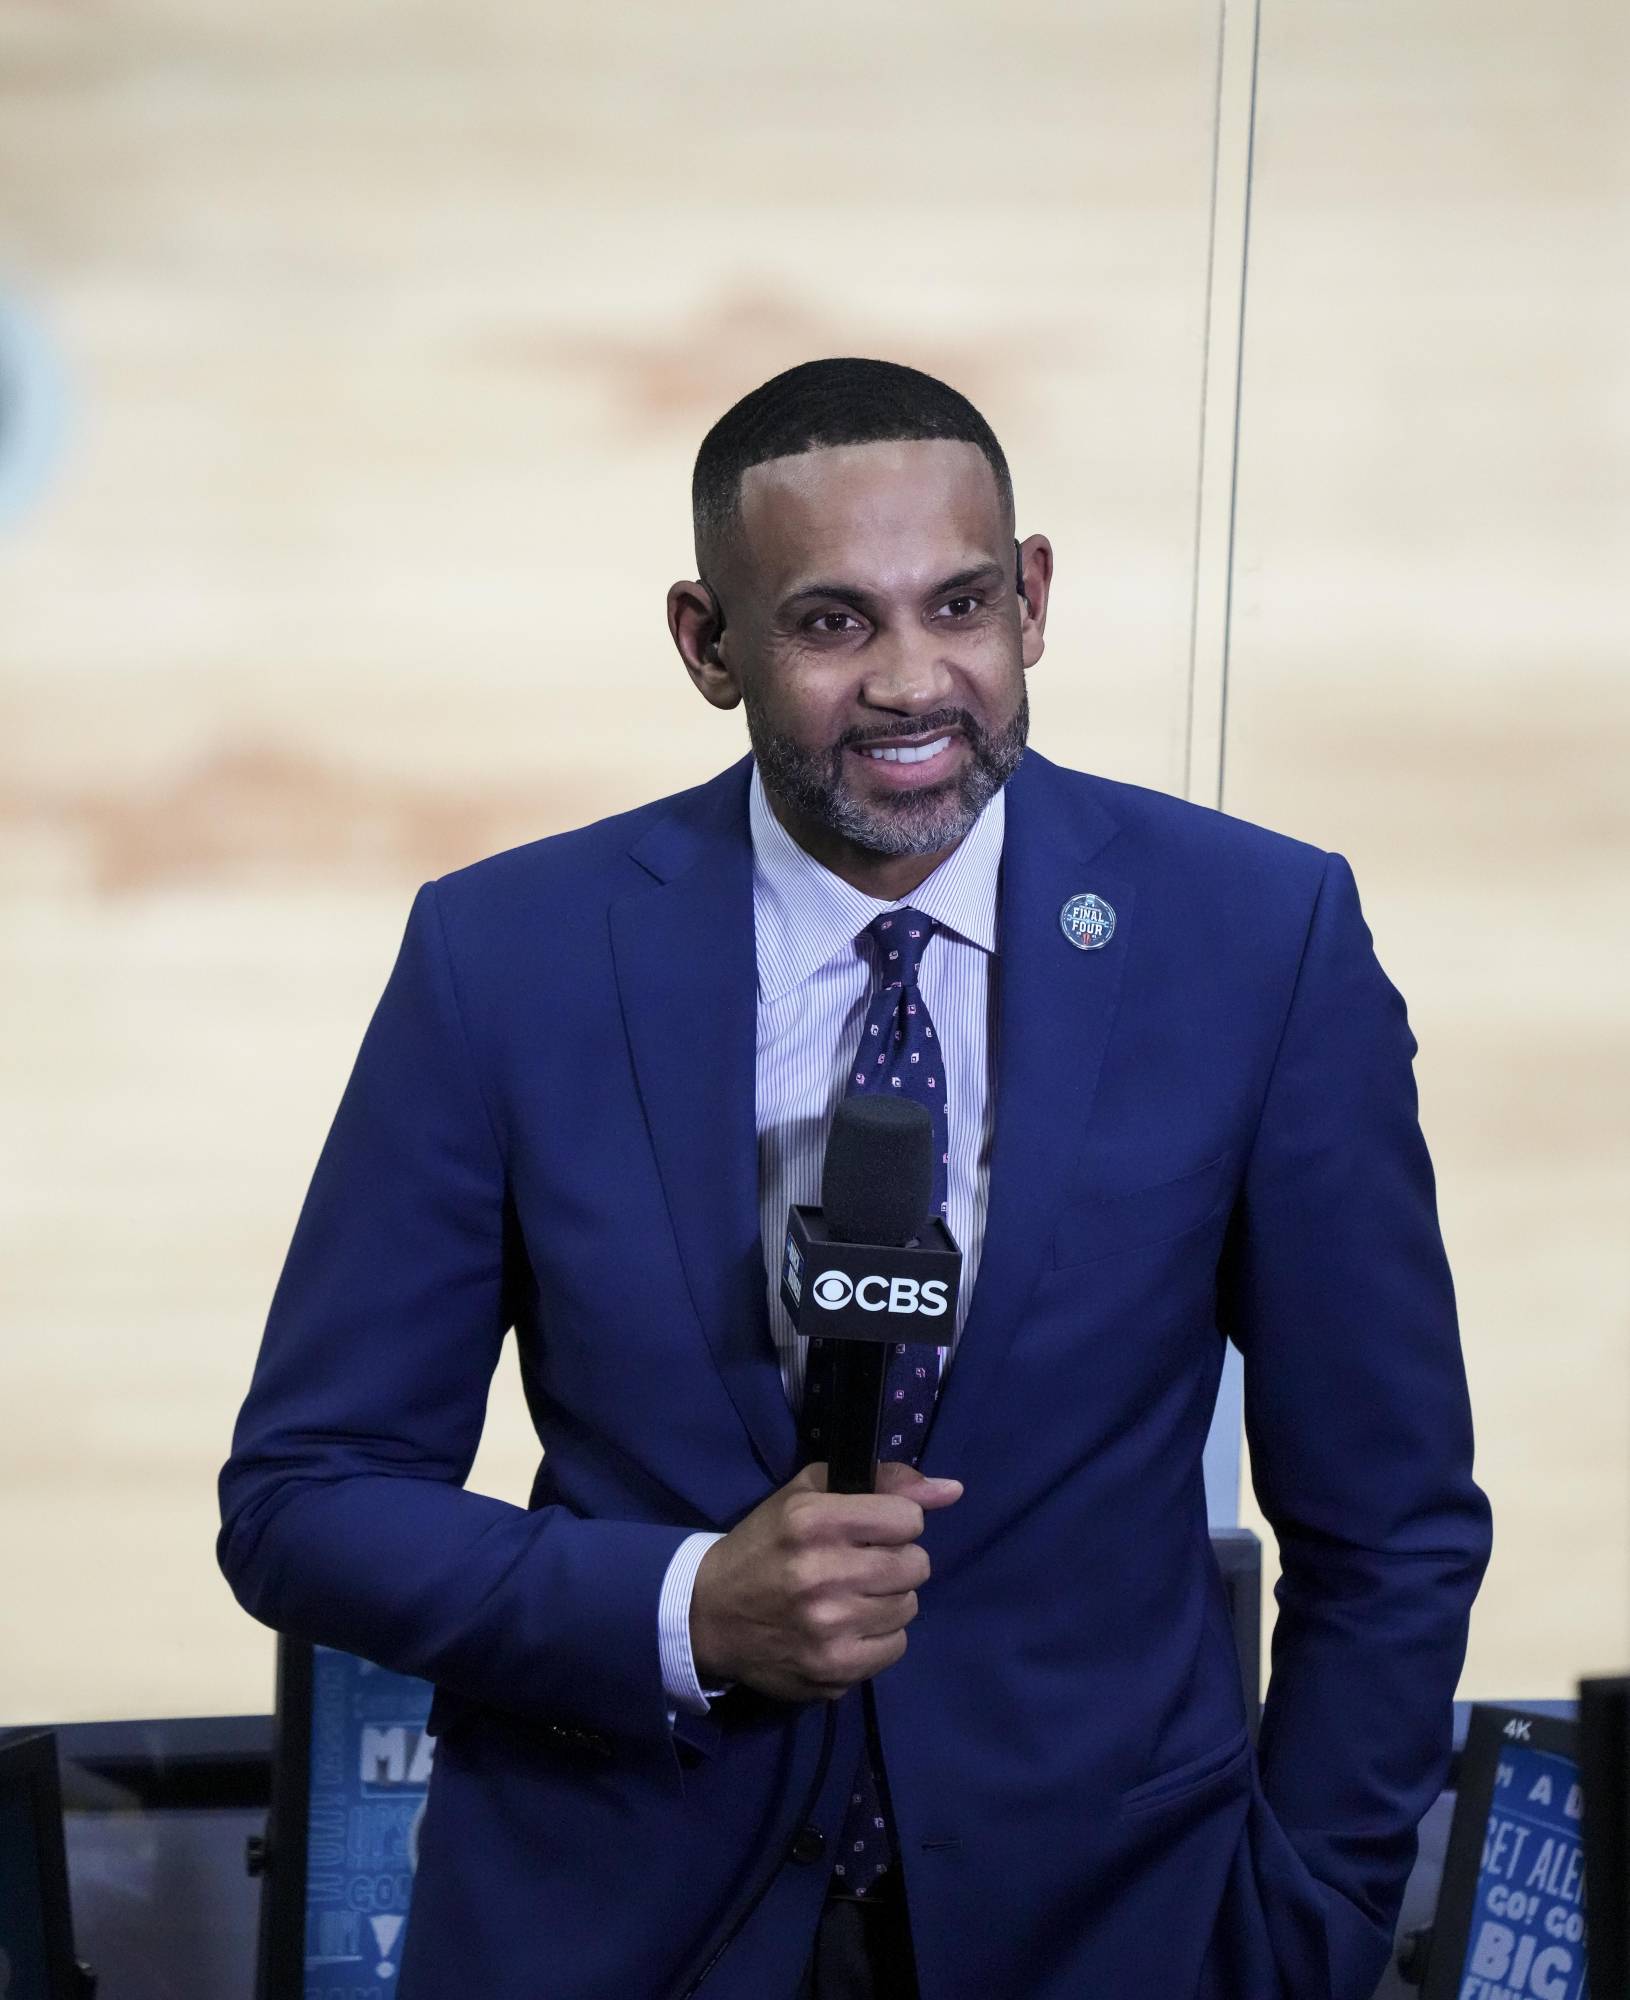 Detroit Pistons' Grant Hill: Hall of Fame player and person